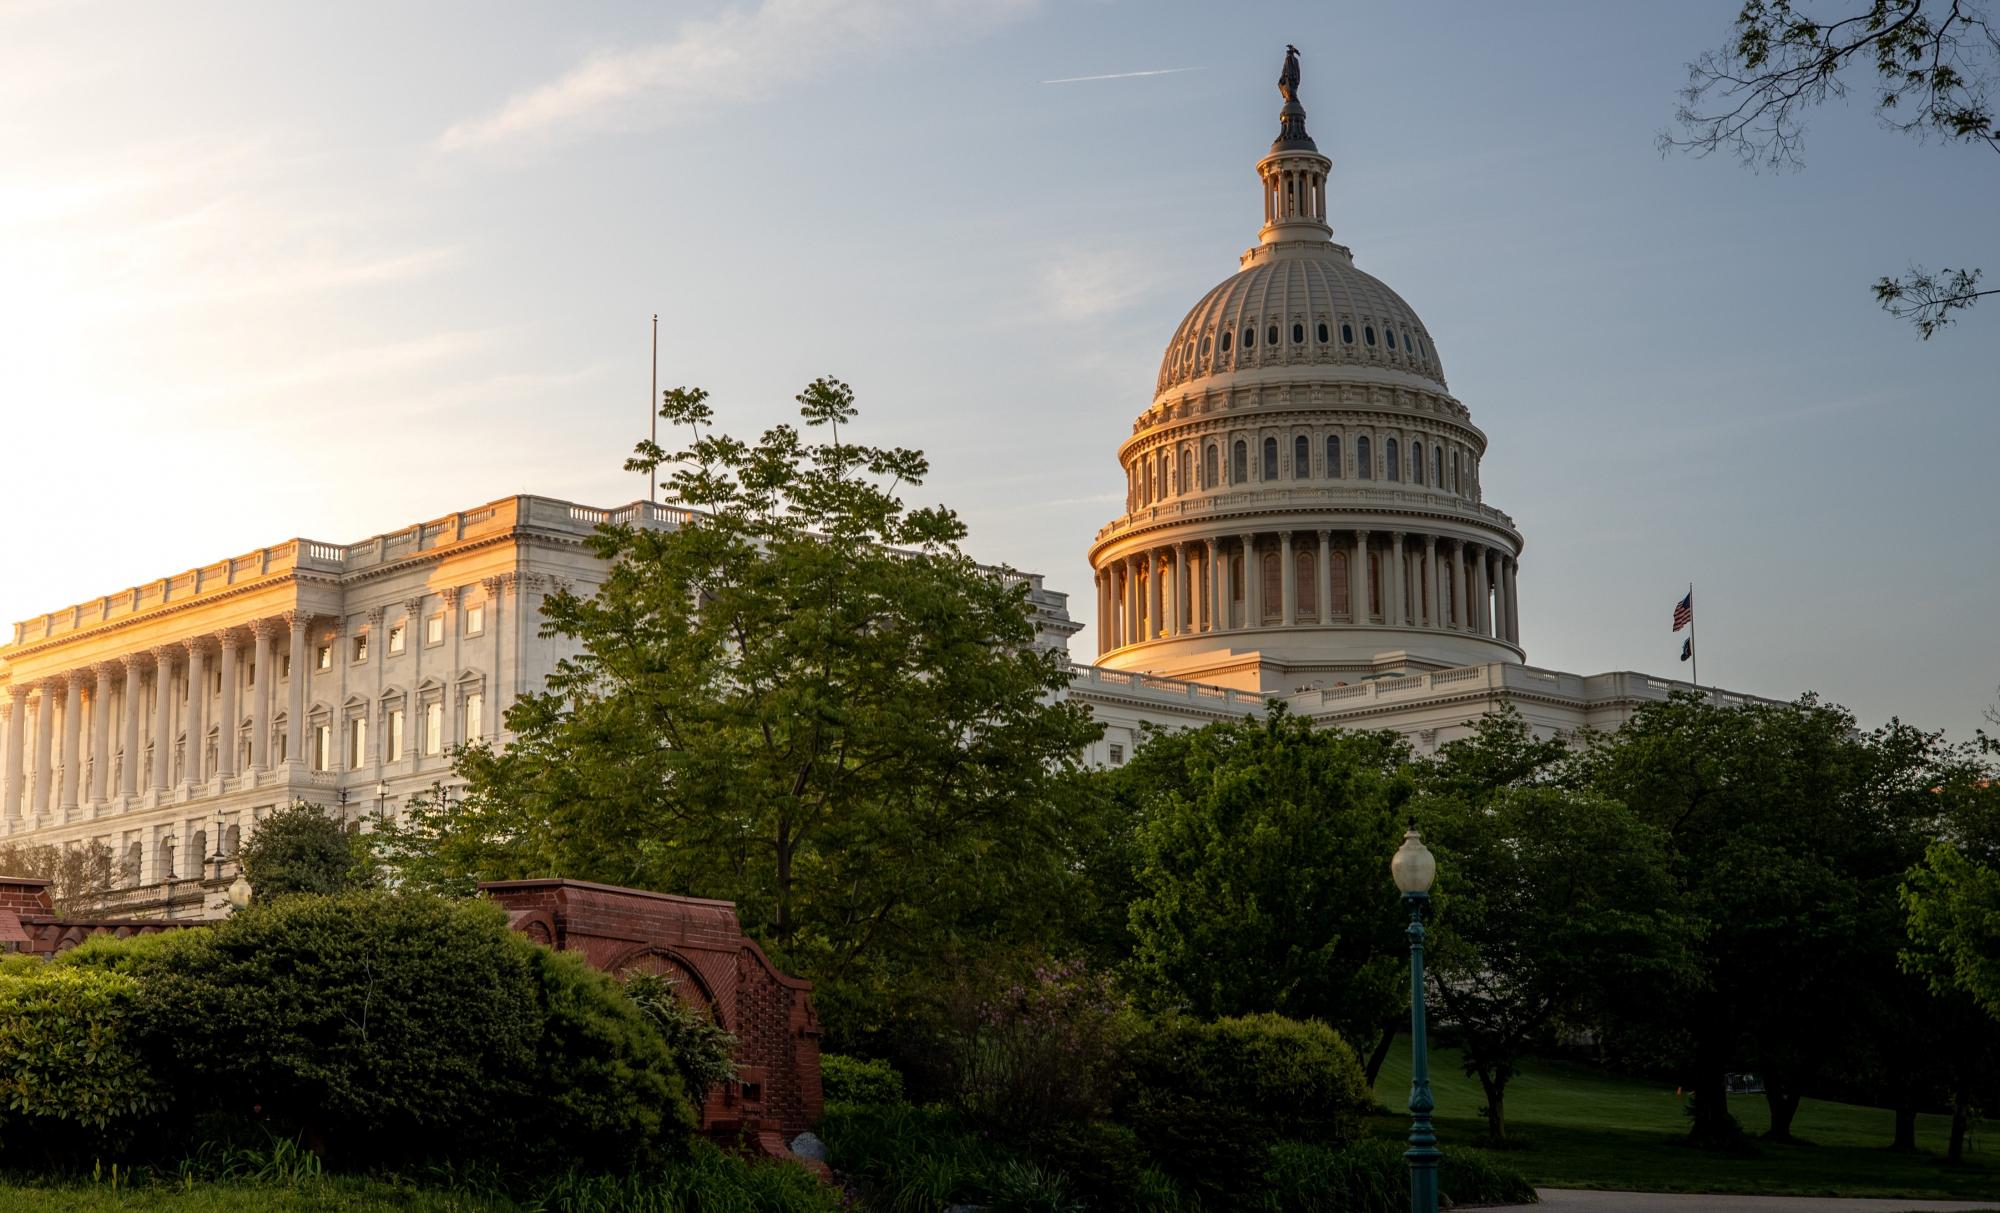 United States Capitol and surrounding greenery